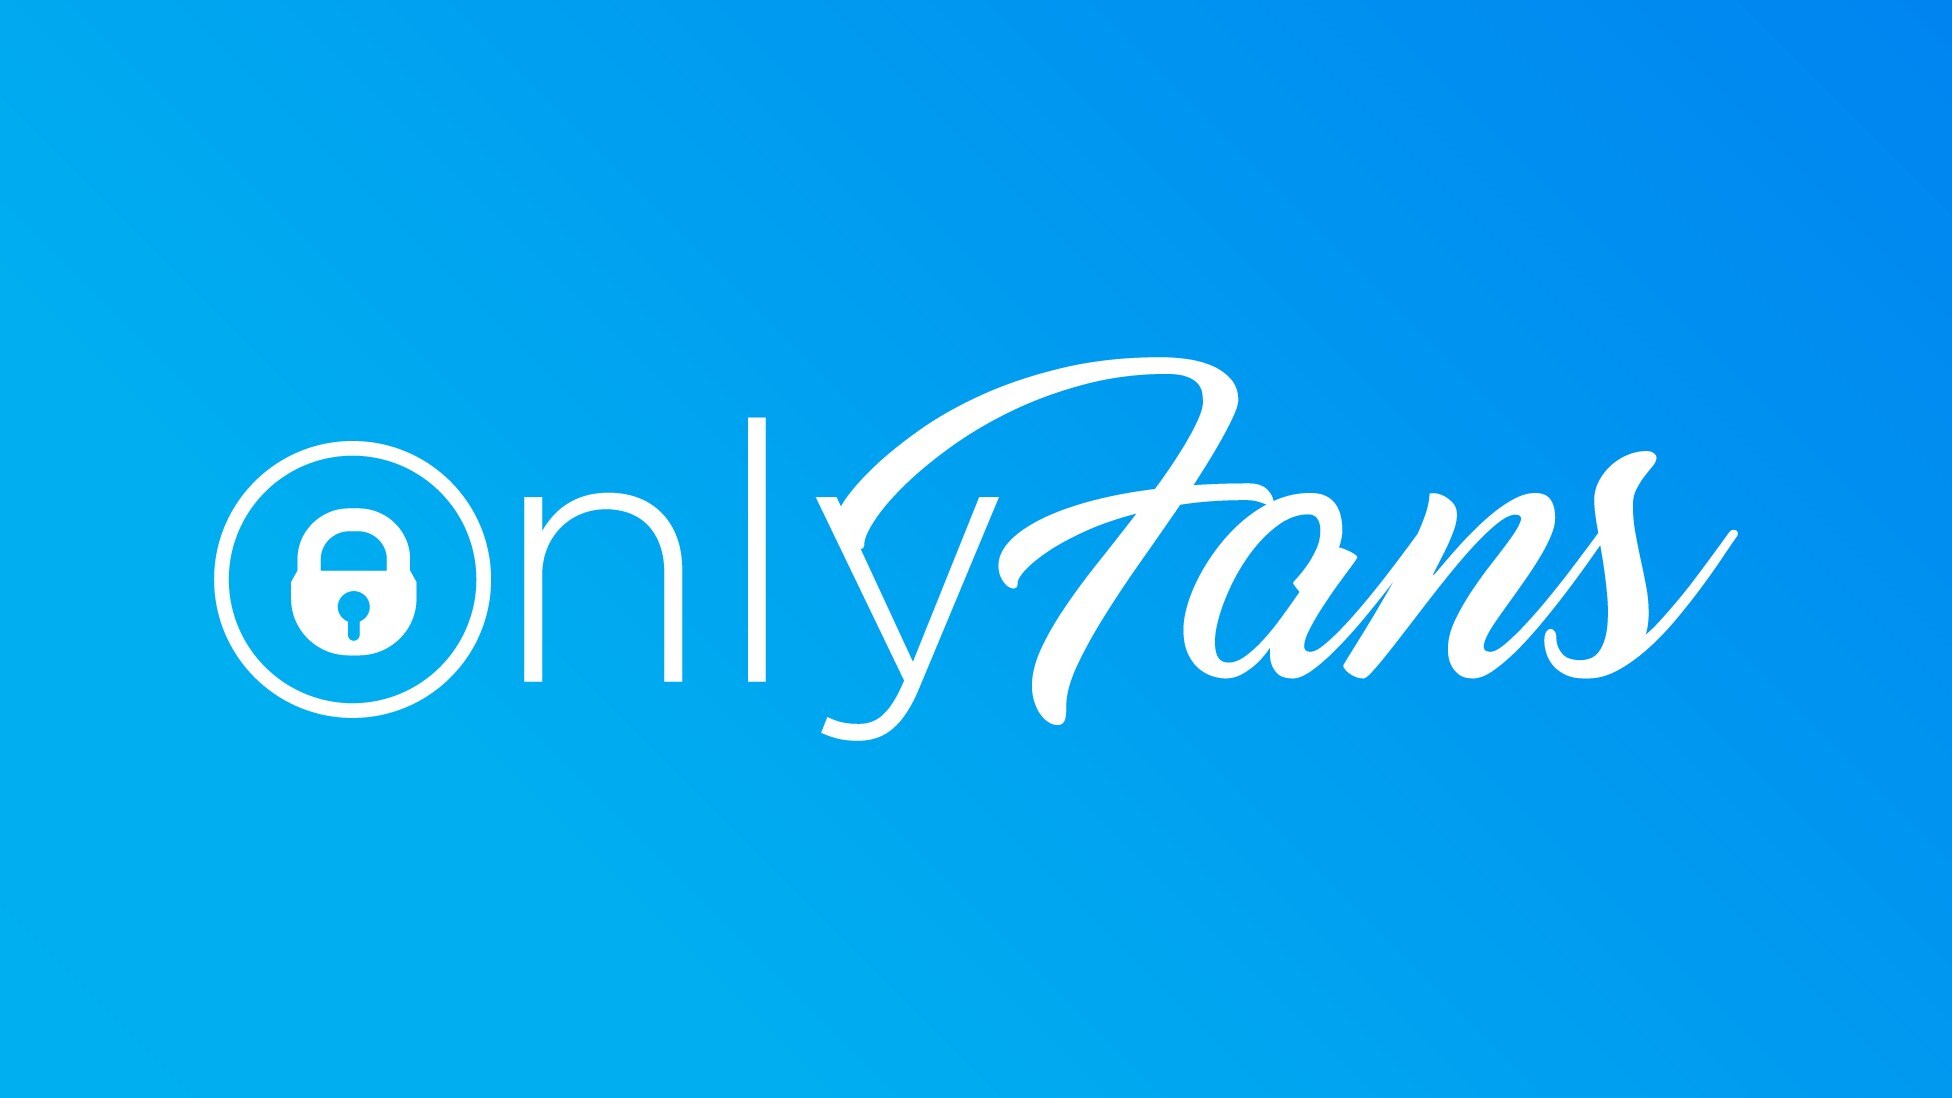 Only fans news